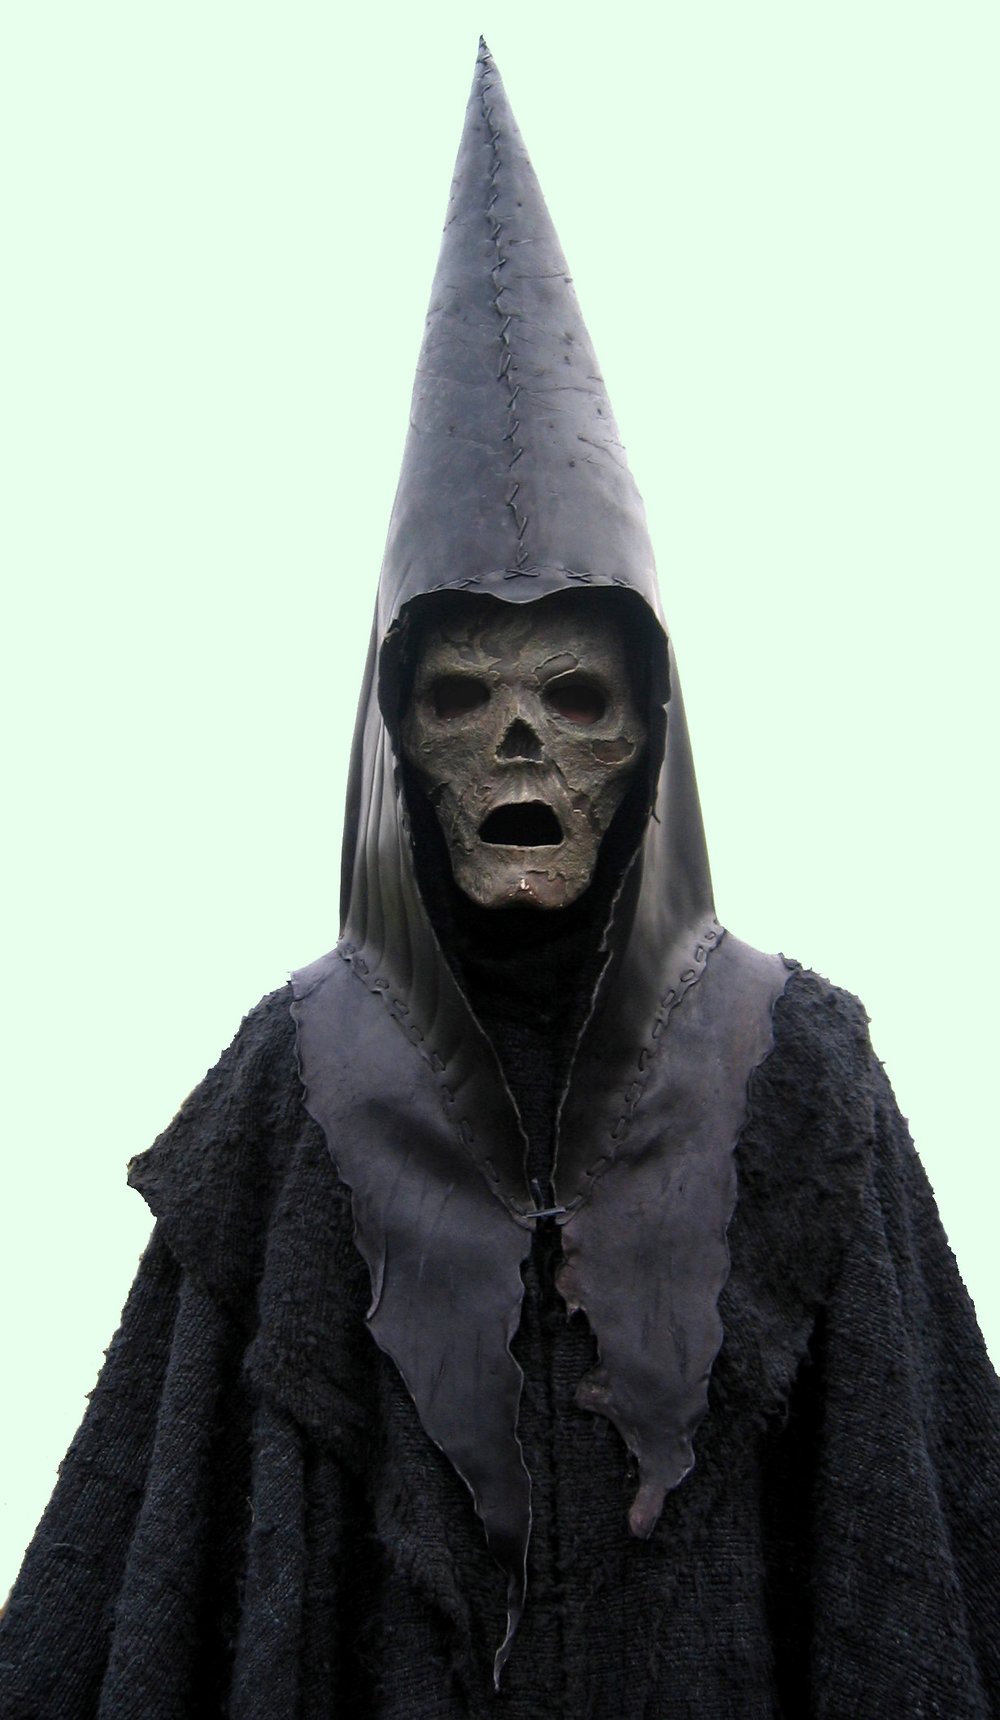 whitaker-malem-movie-harry-potter-and-the-goblet-of-fire-death-eater-head-dress-costume.jpg